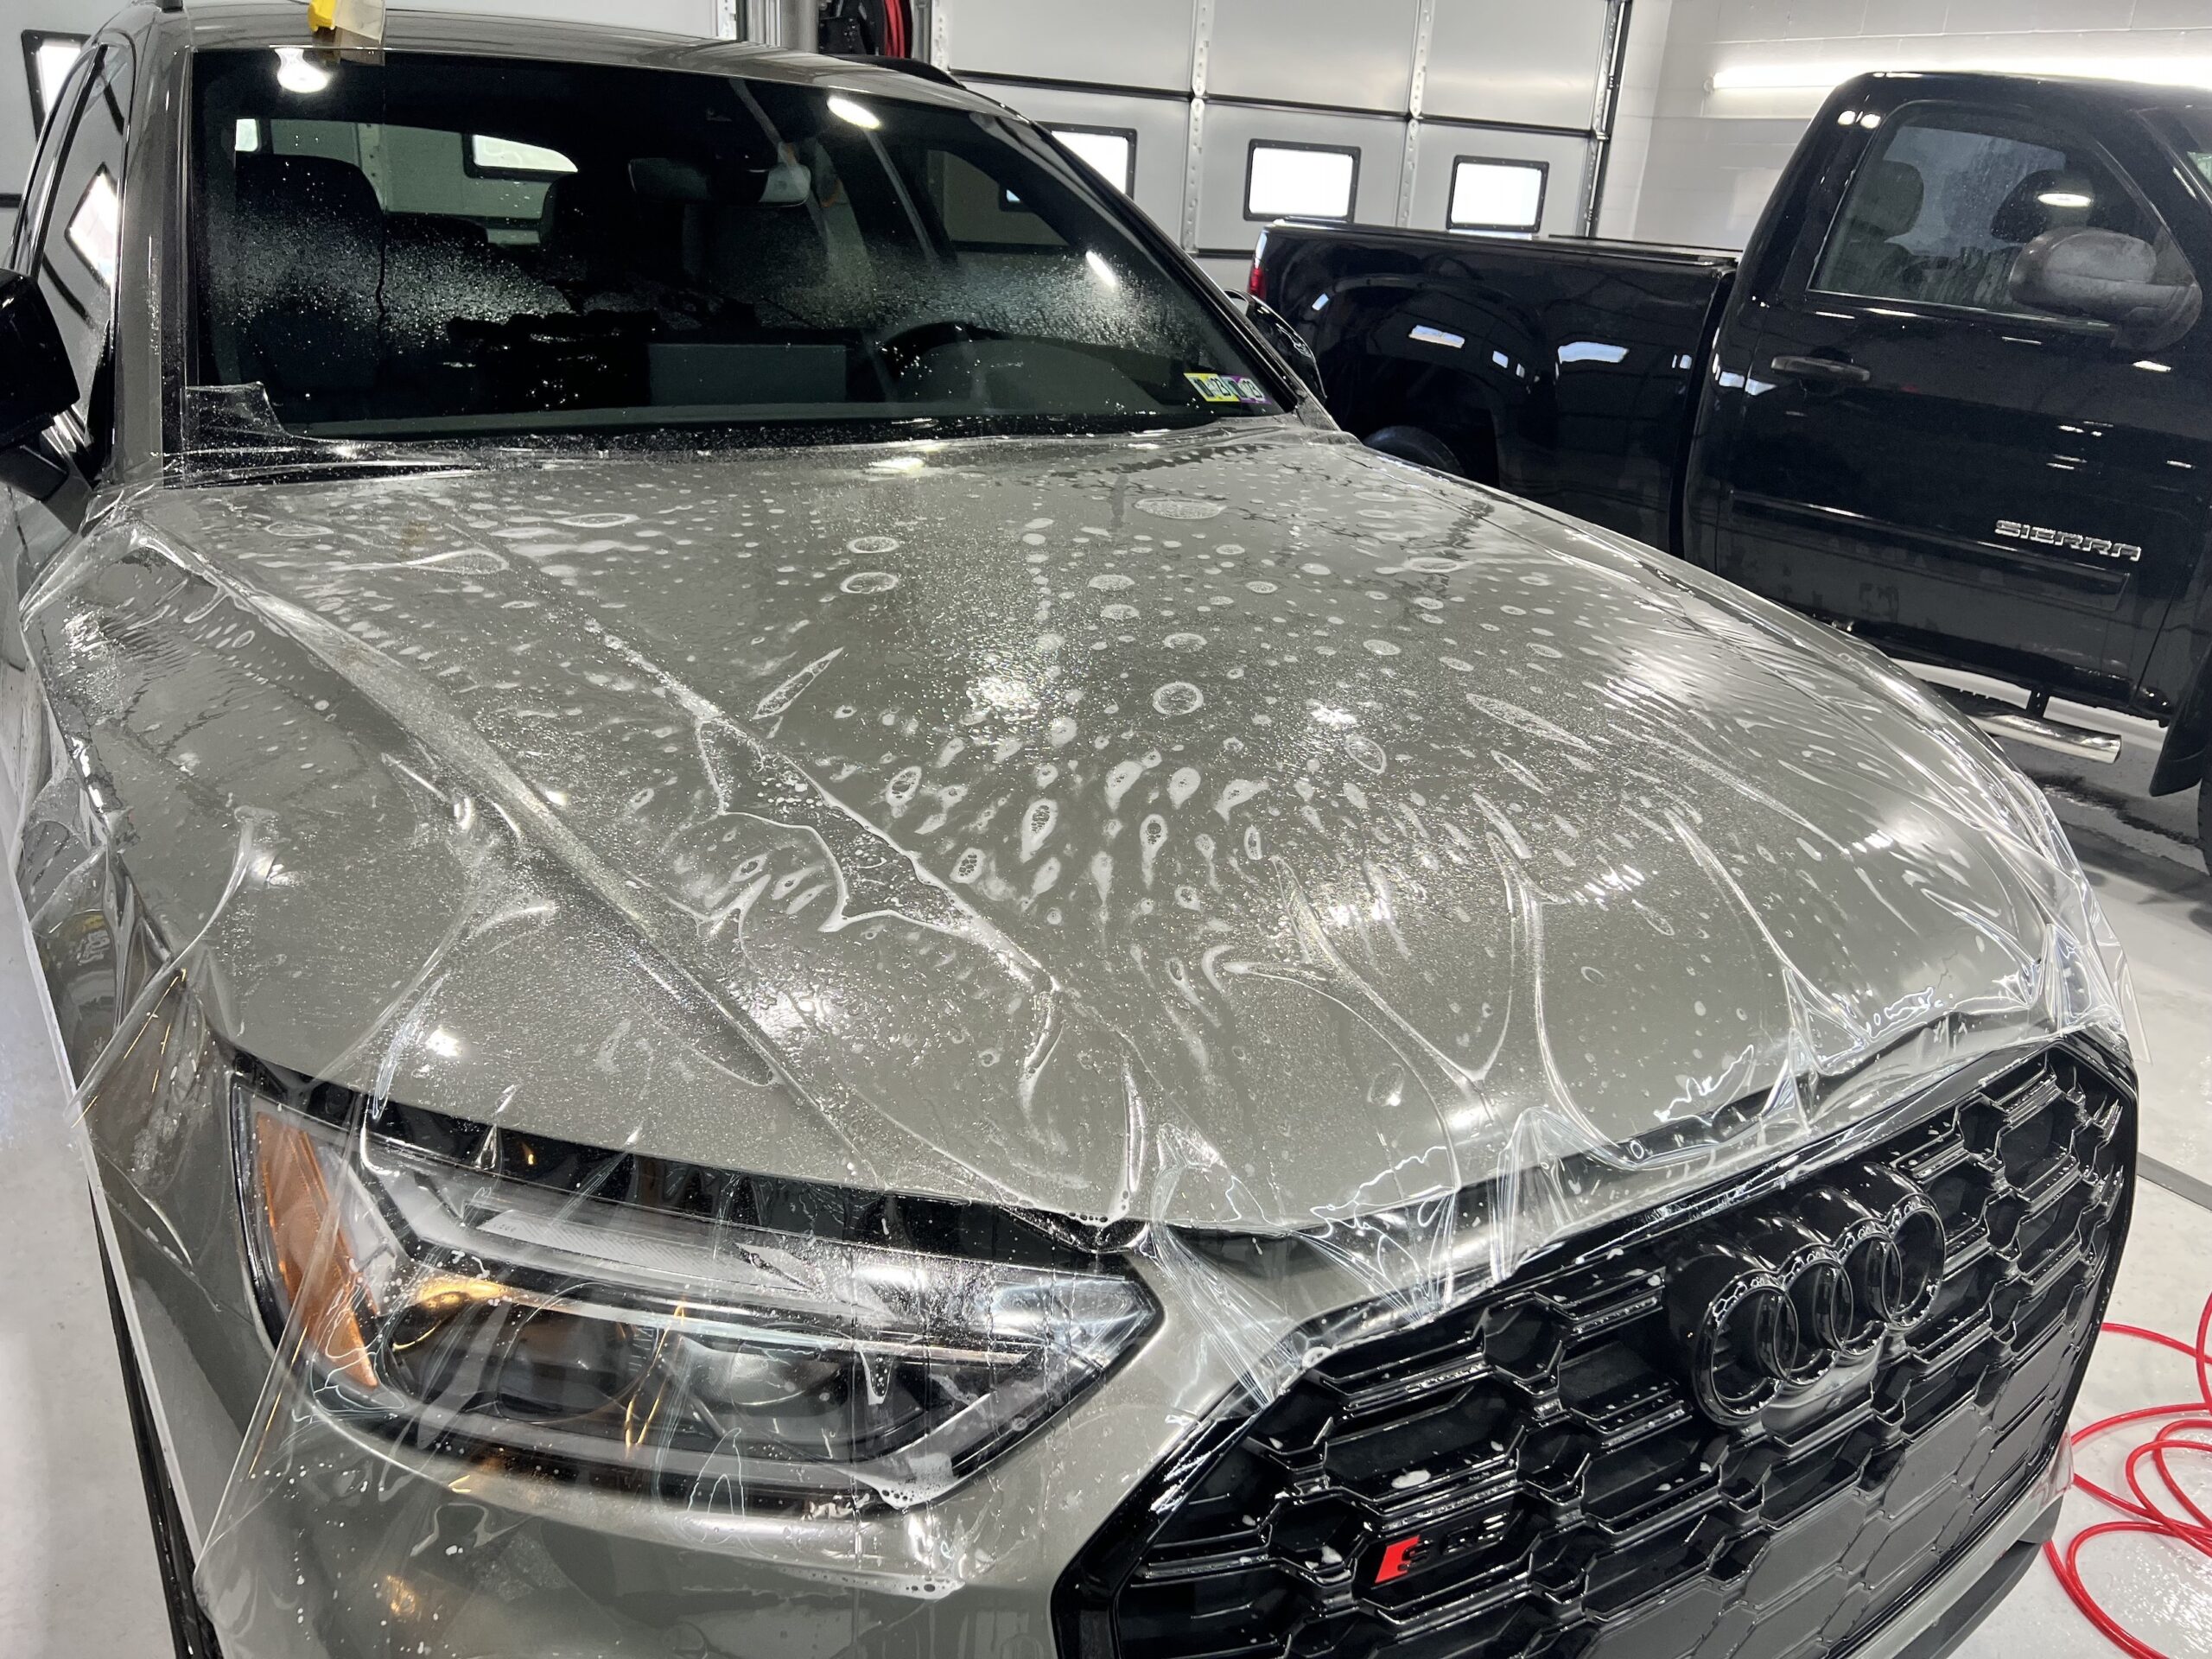 But Which One? Choosing Your Paint Protection Film/Clear Bra